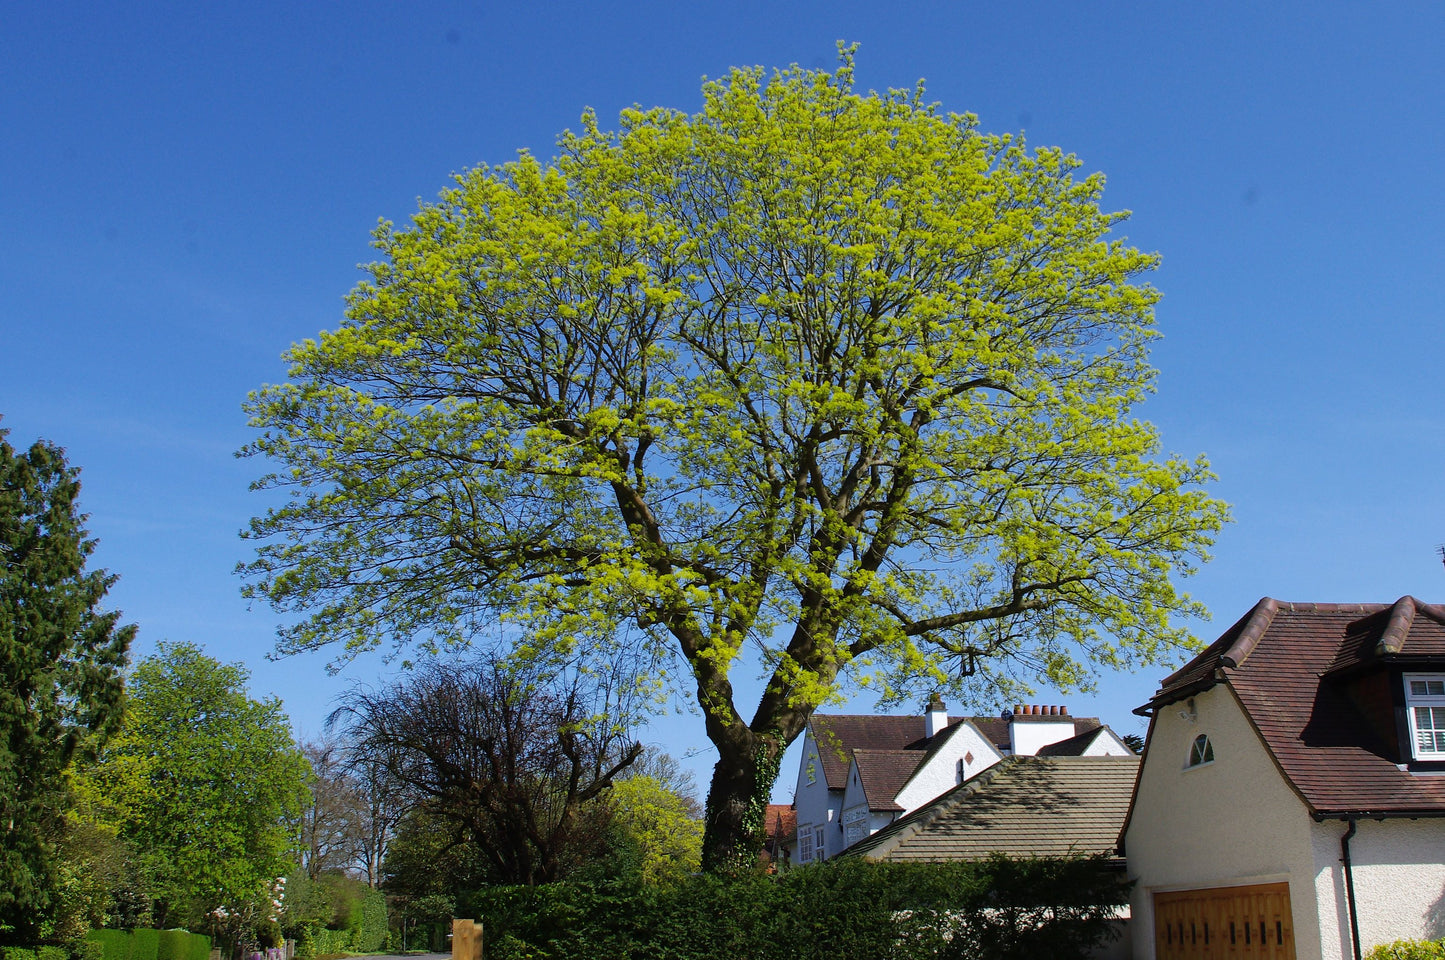 Norway Maple Acer platanoides 100 Seeds   USA Company